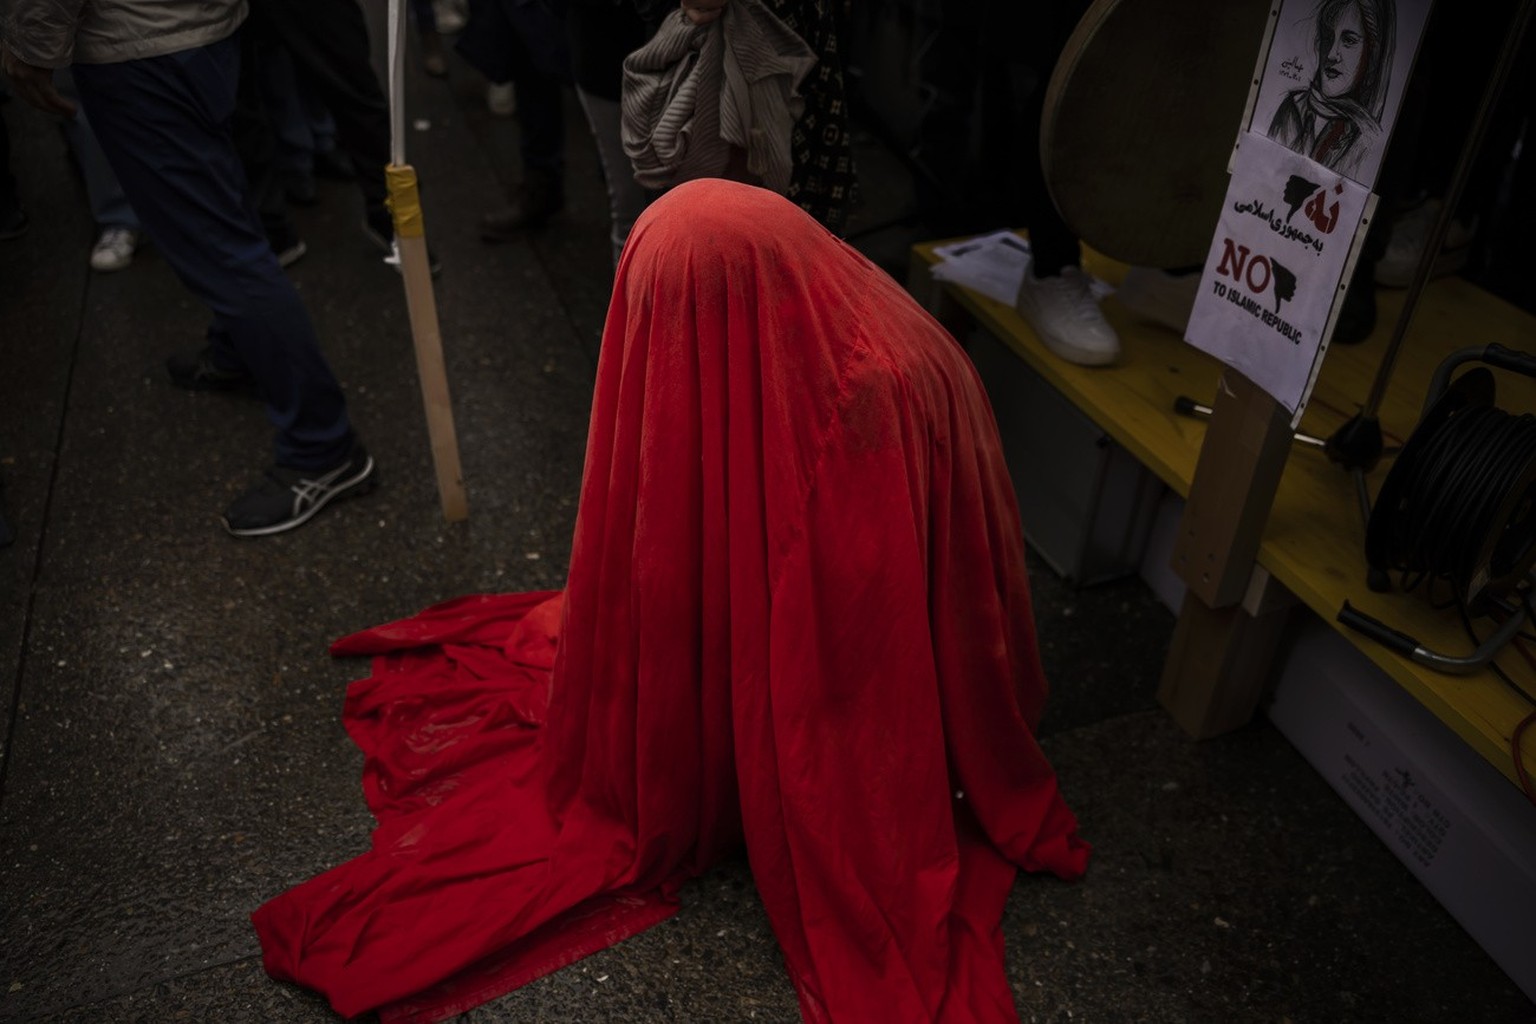 A woman performs during a protest against the death of Iranian Mahsa Amini, in Zurich, Switzerland, on Saturday October 1, 2022. Amini, a 22-year-old woman who died in Iran while in police custody, wa ...